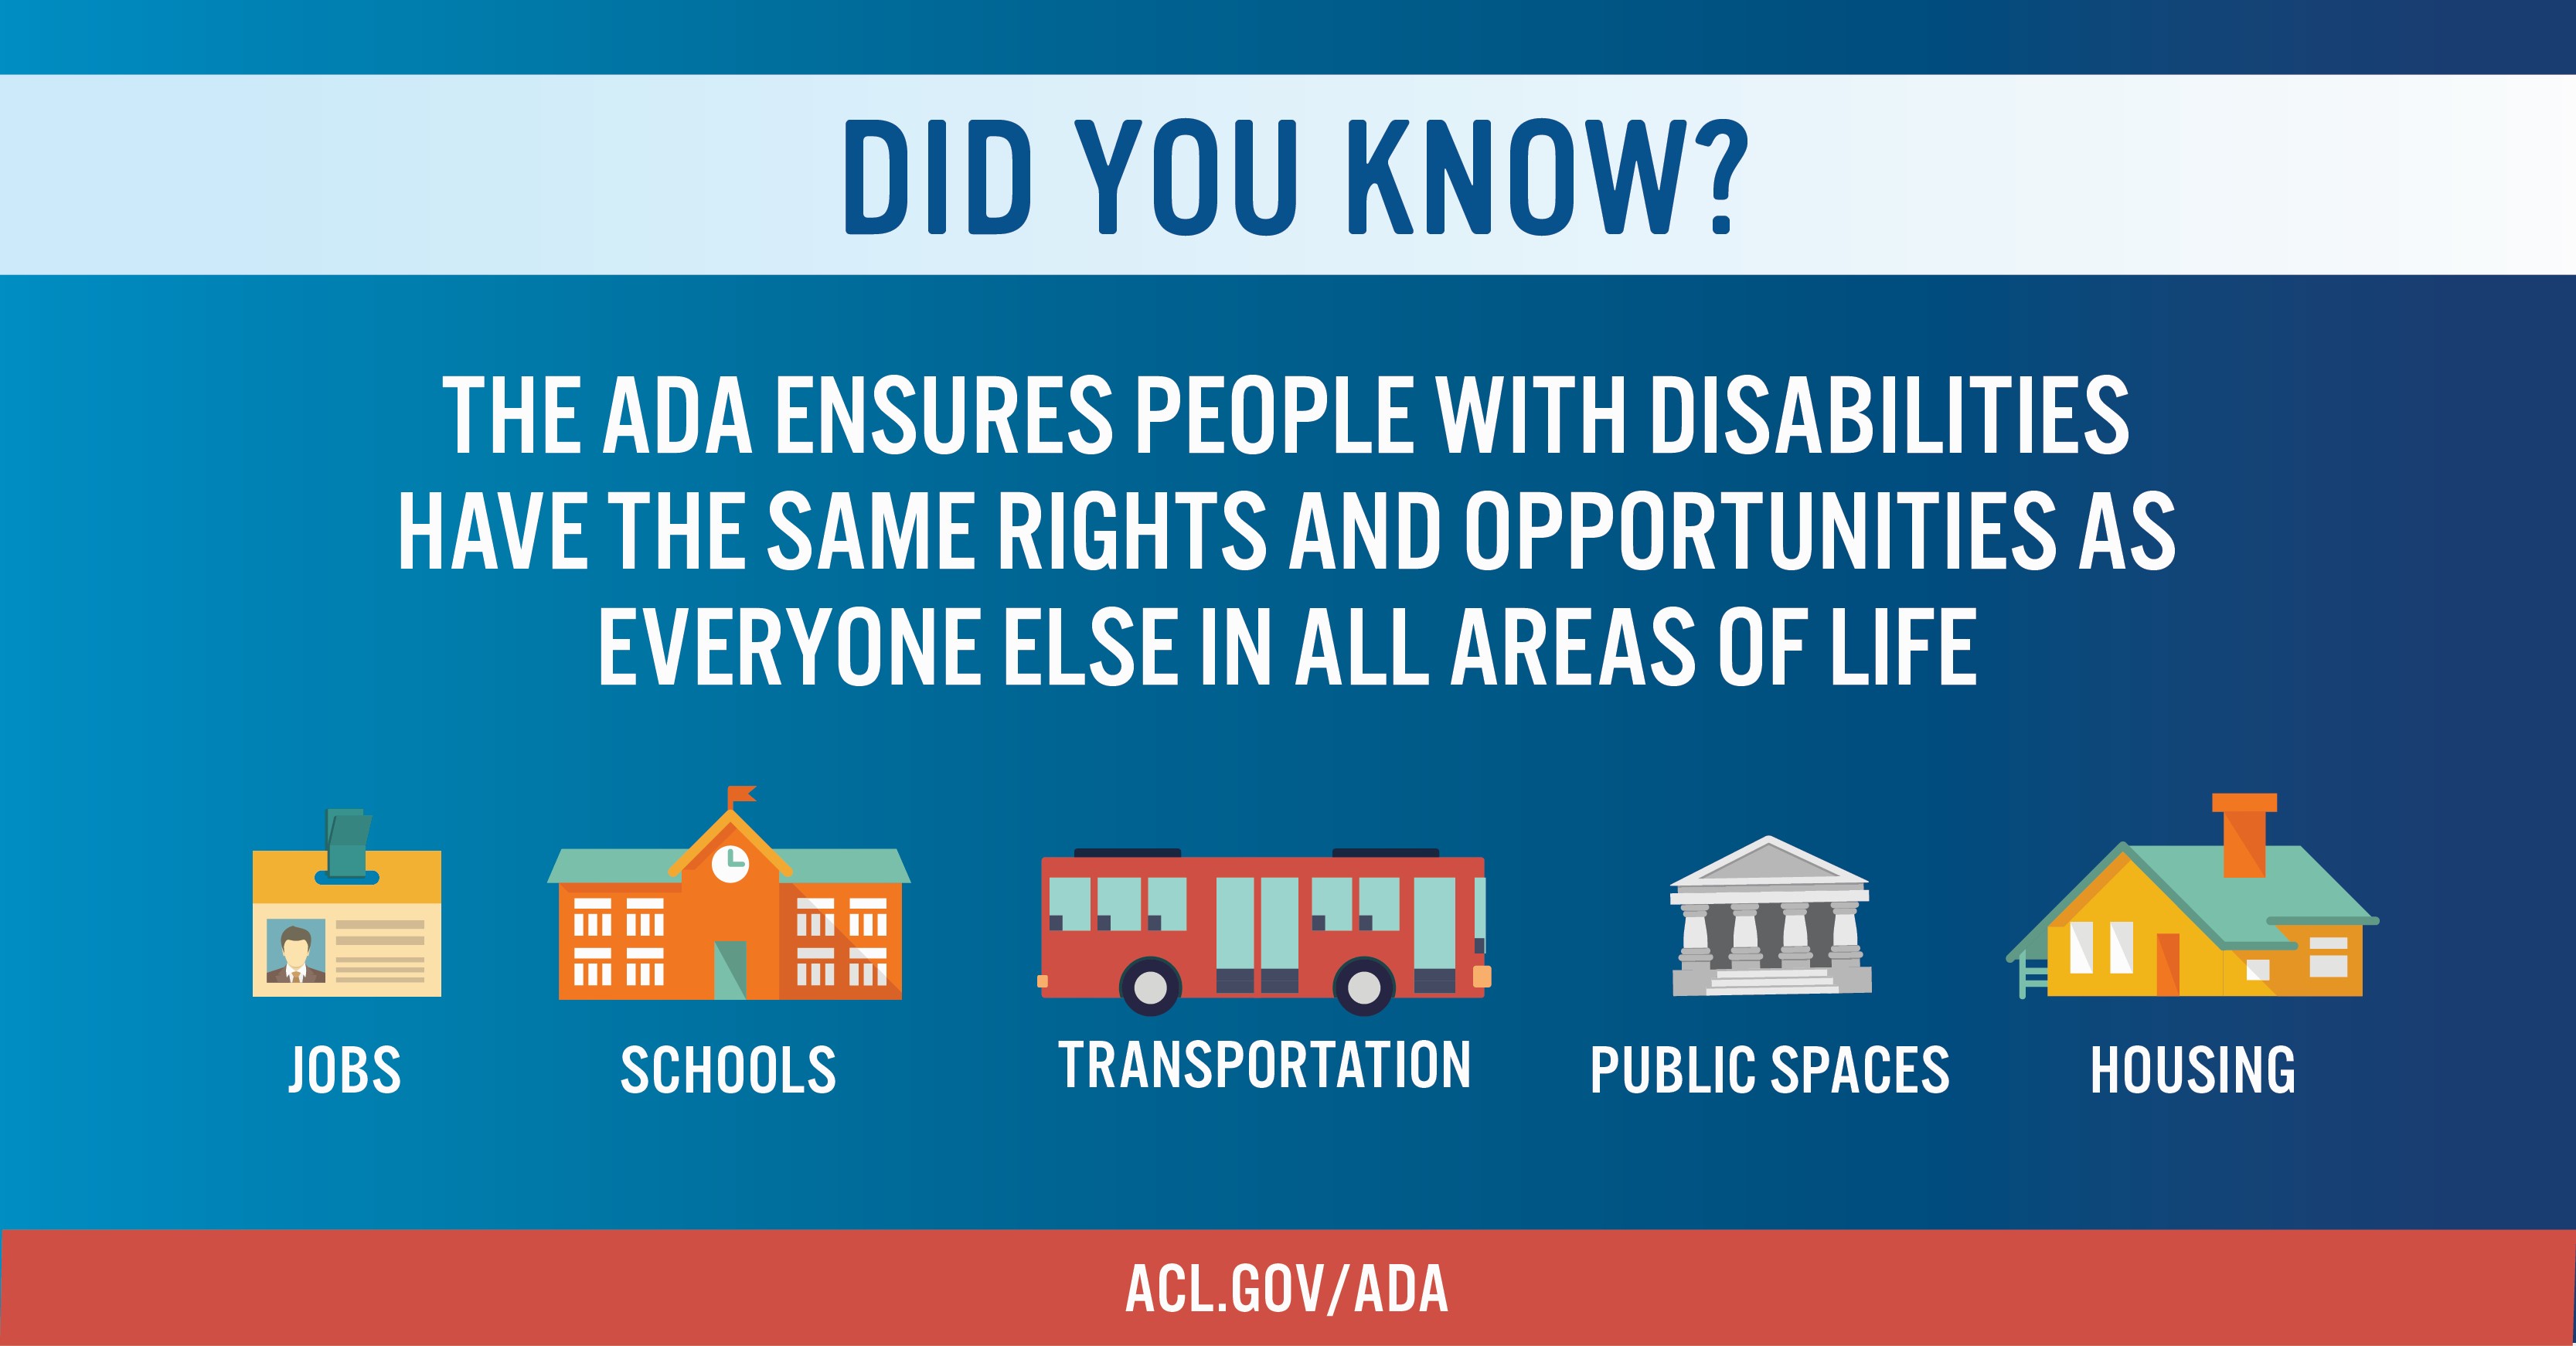 The ADA ensures people with disabilities have the same opportunities in all areas of life